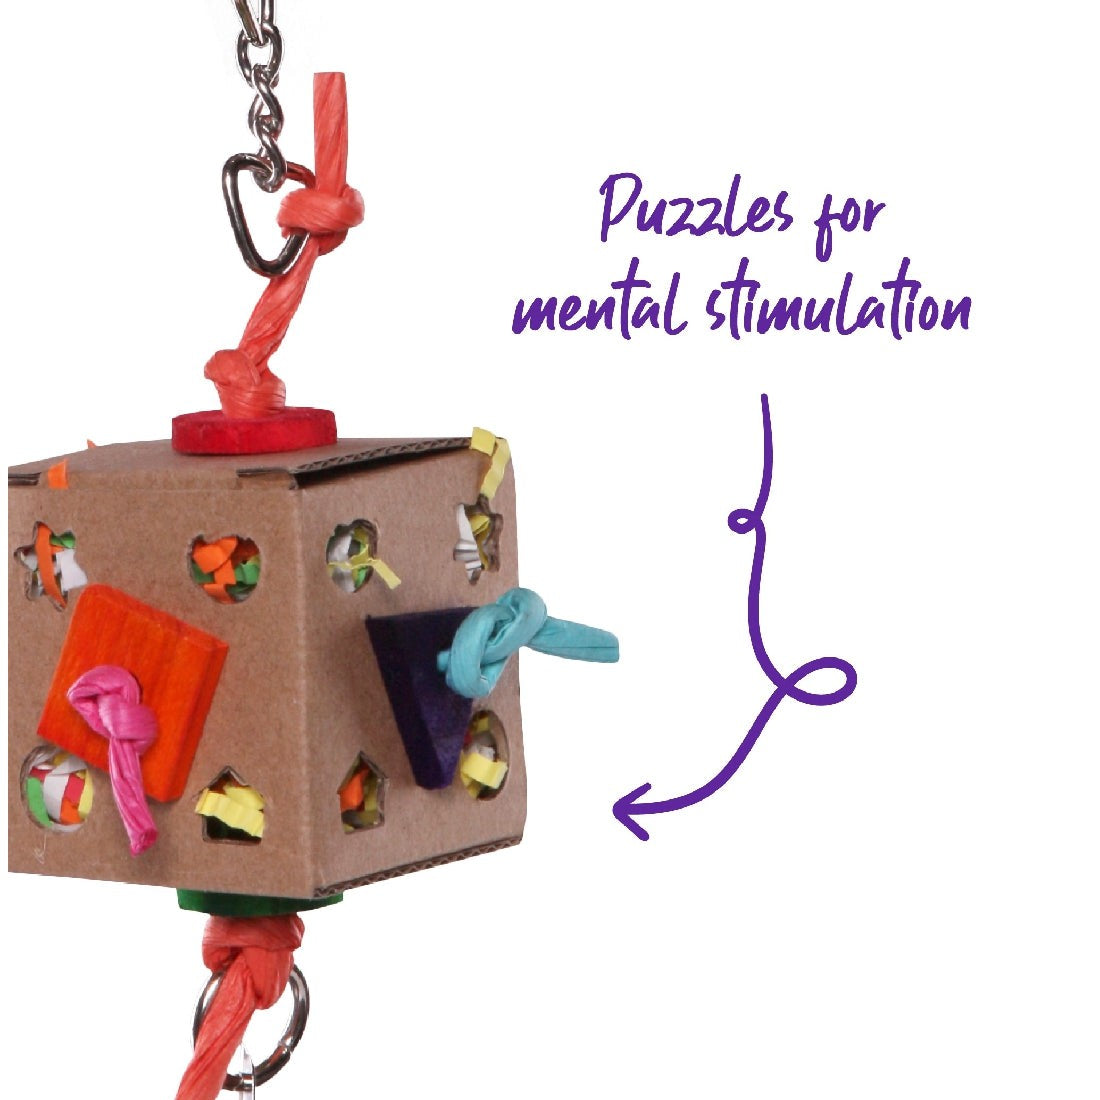 Cardboard bird toy with colorful knots and paper for mental stimulation.